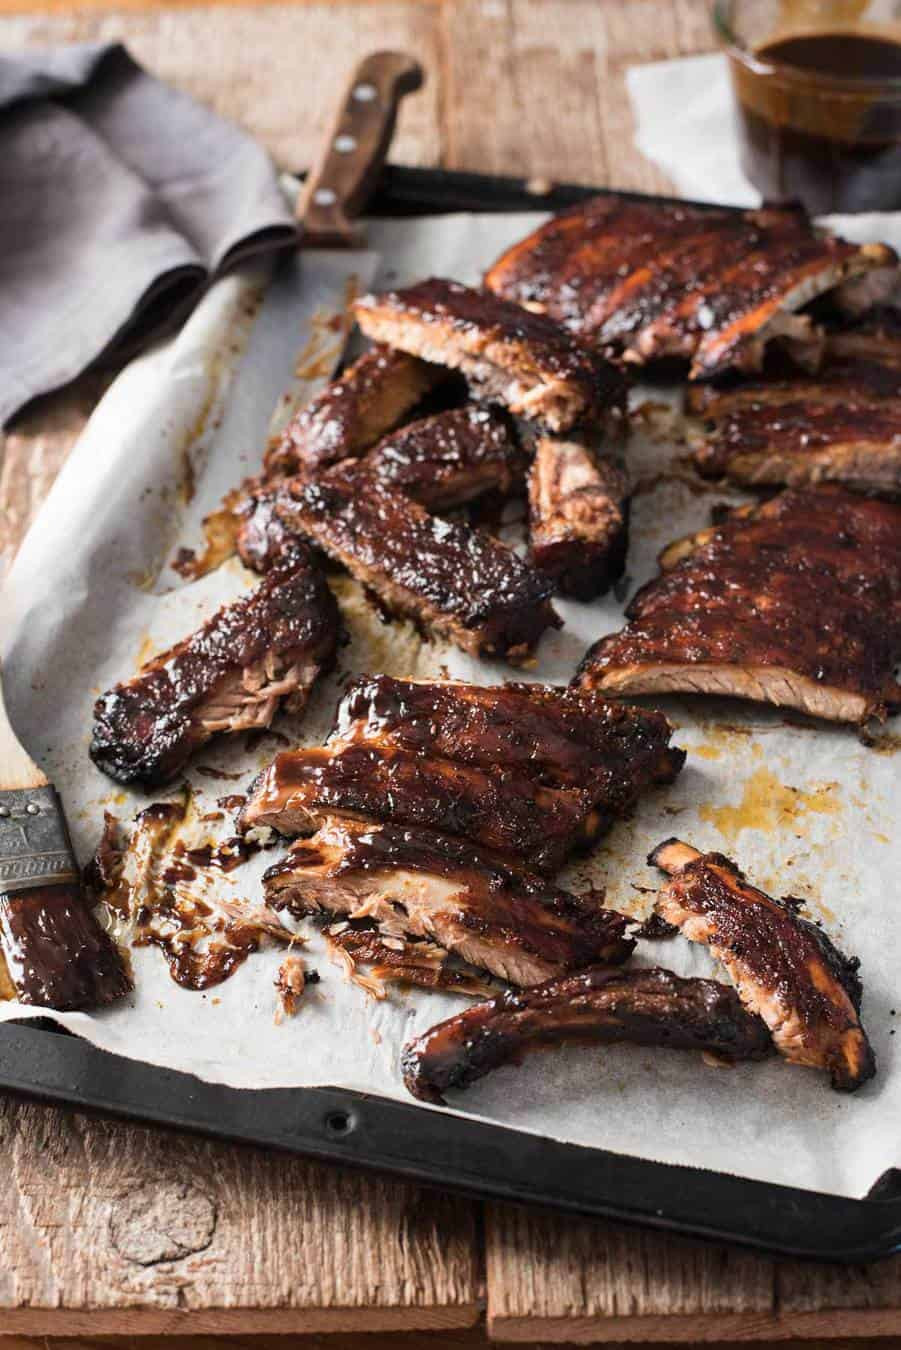 Bbq Pork Ribs In Oven
 Oven Baked Barbecue Pork Ribs